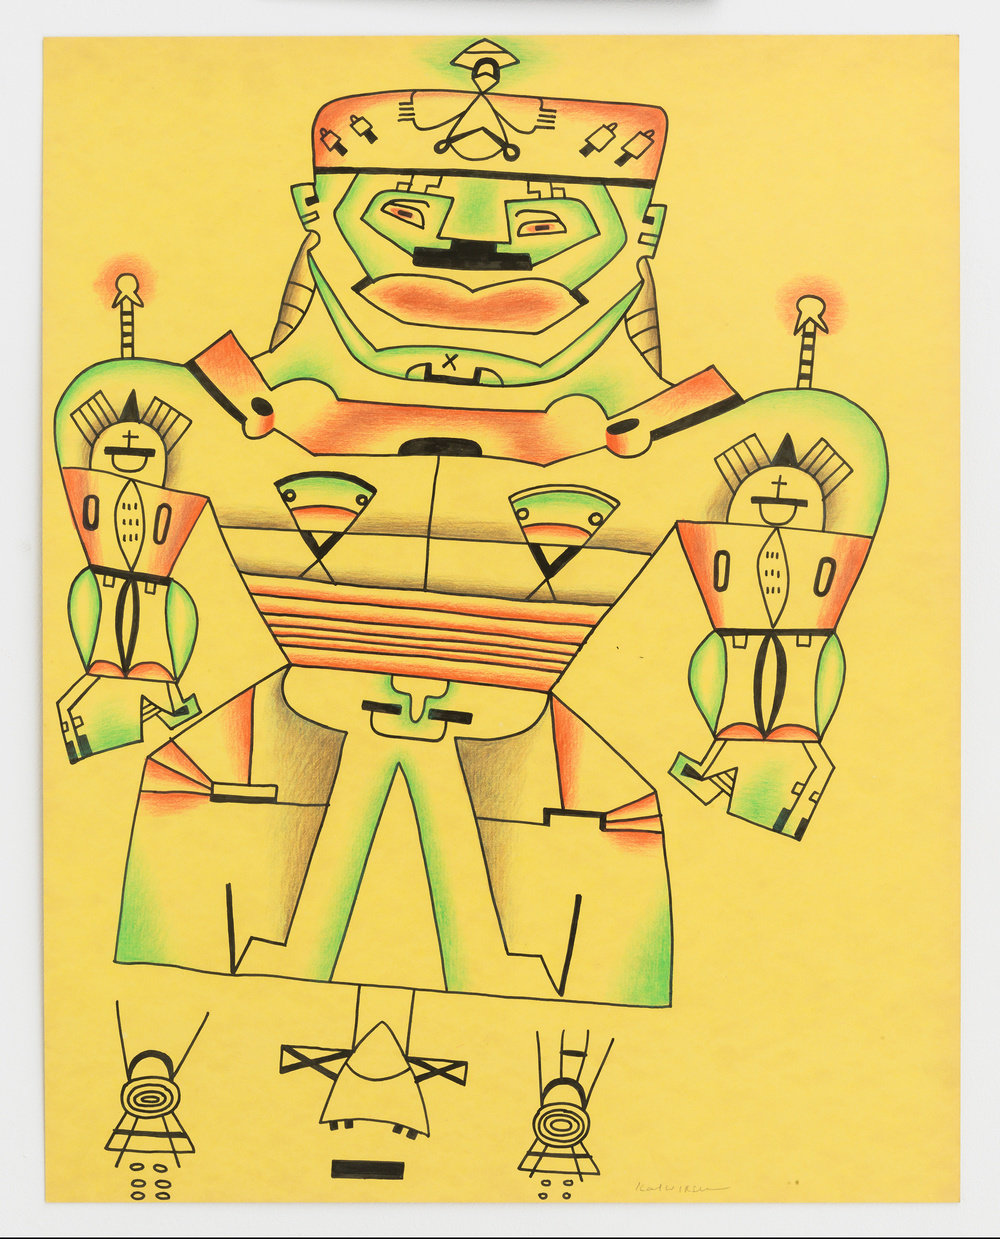 An ink and color pencil on yellow paper drawing by Karl Wirsum of an abstract figure with sharp outlines, with touches of soft green, red and grey. 